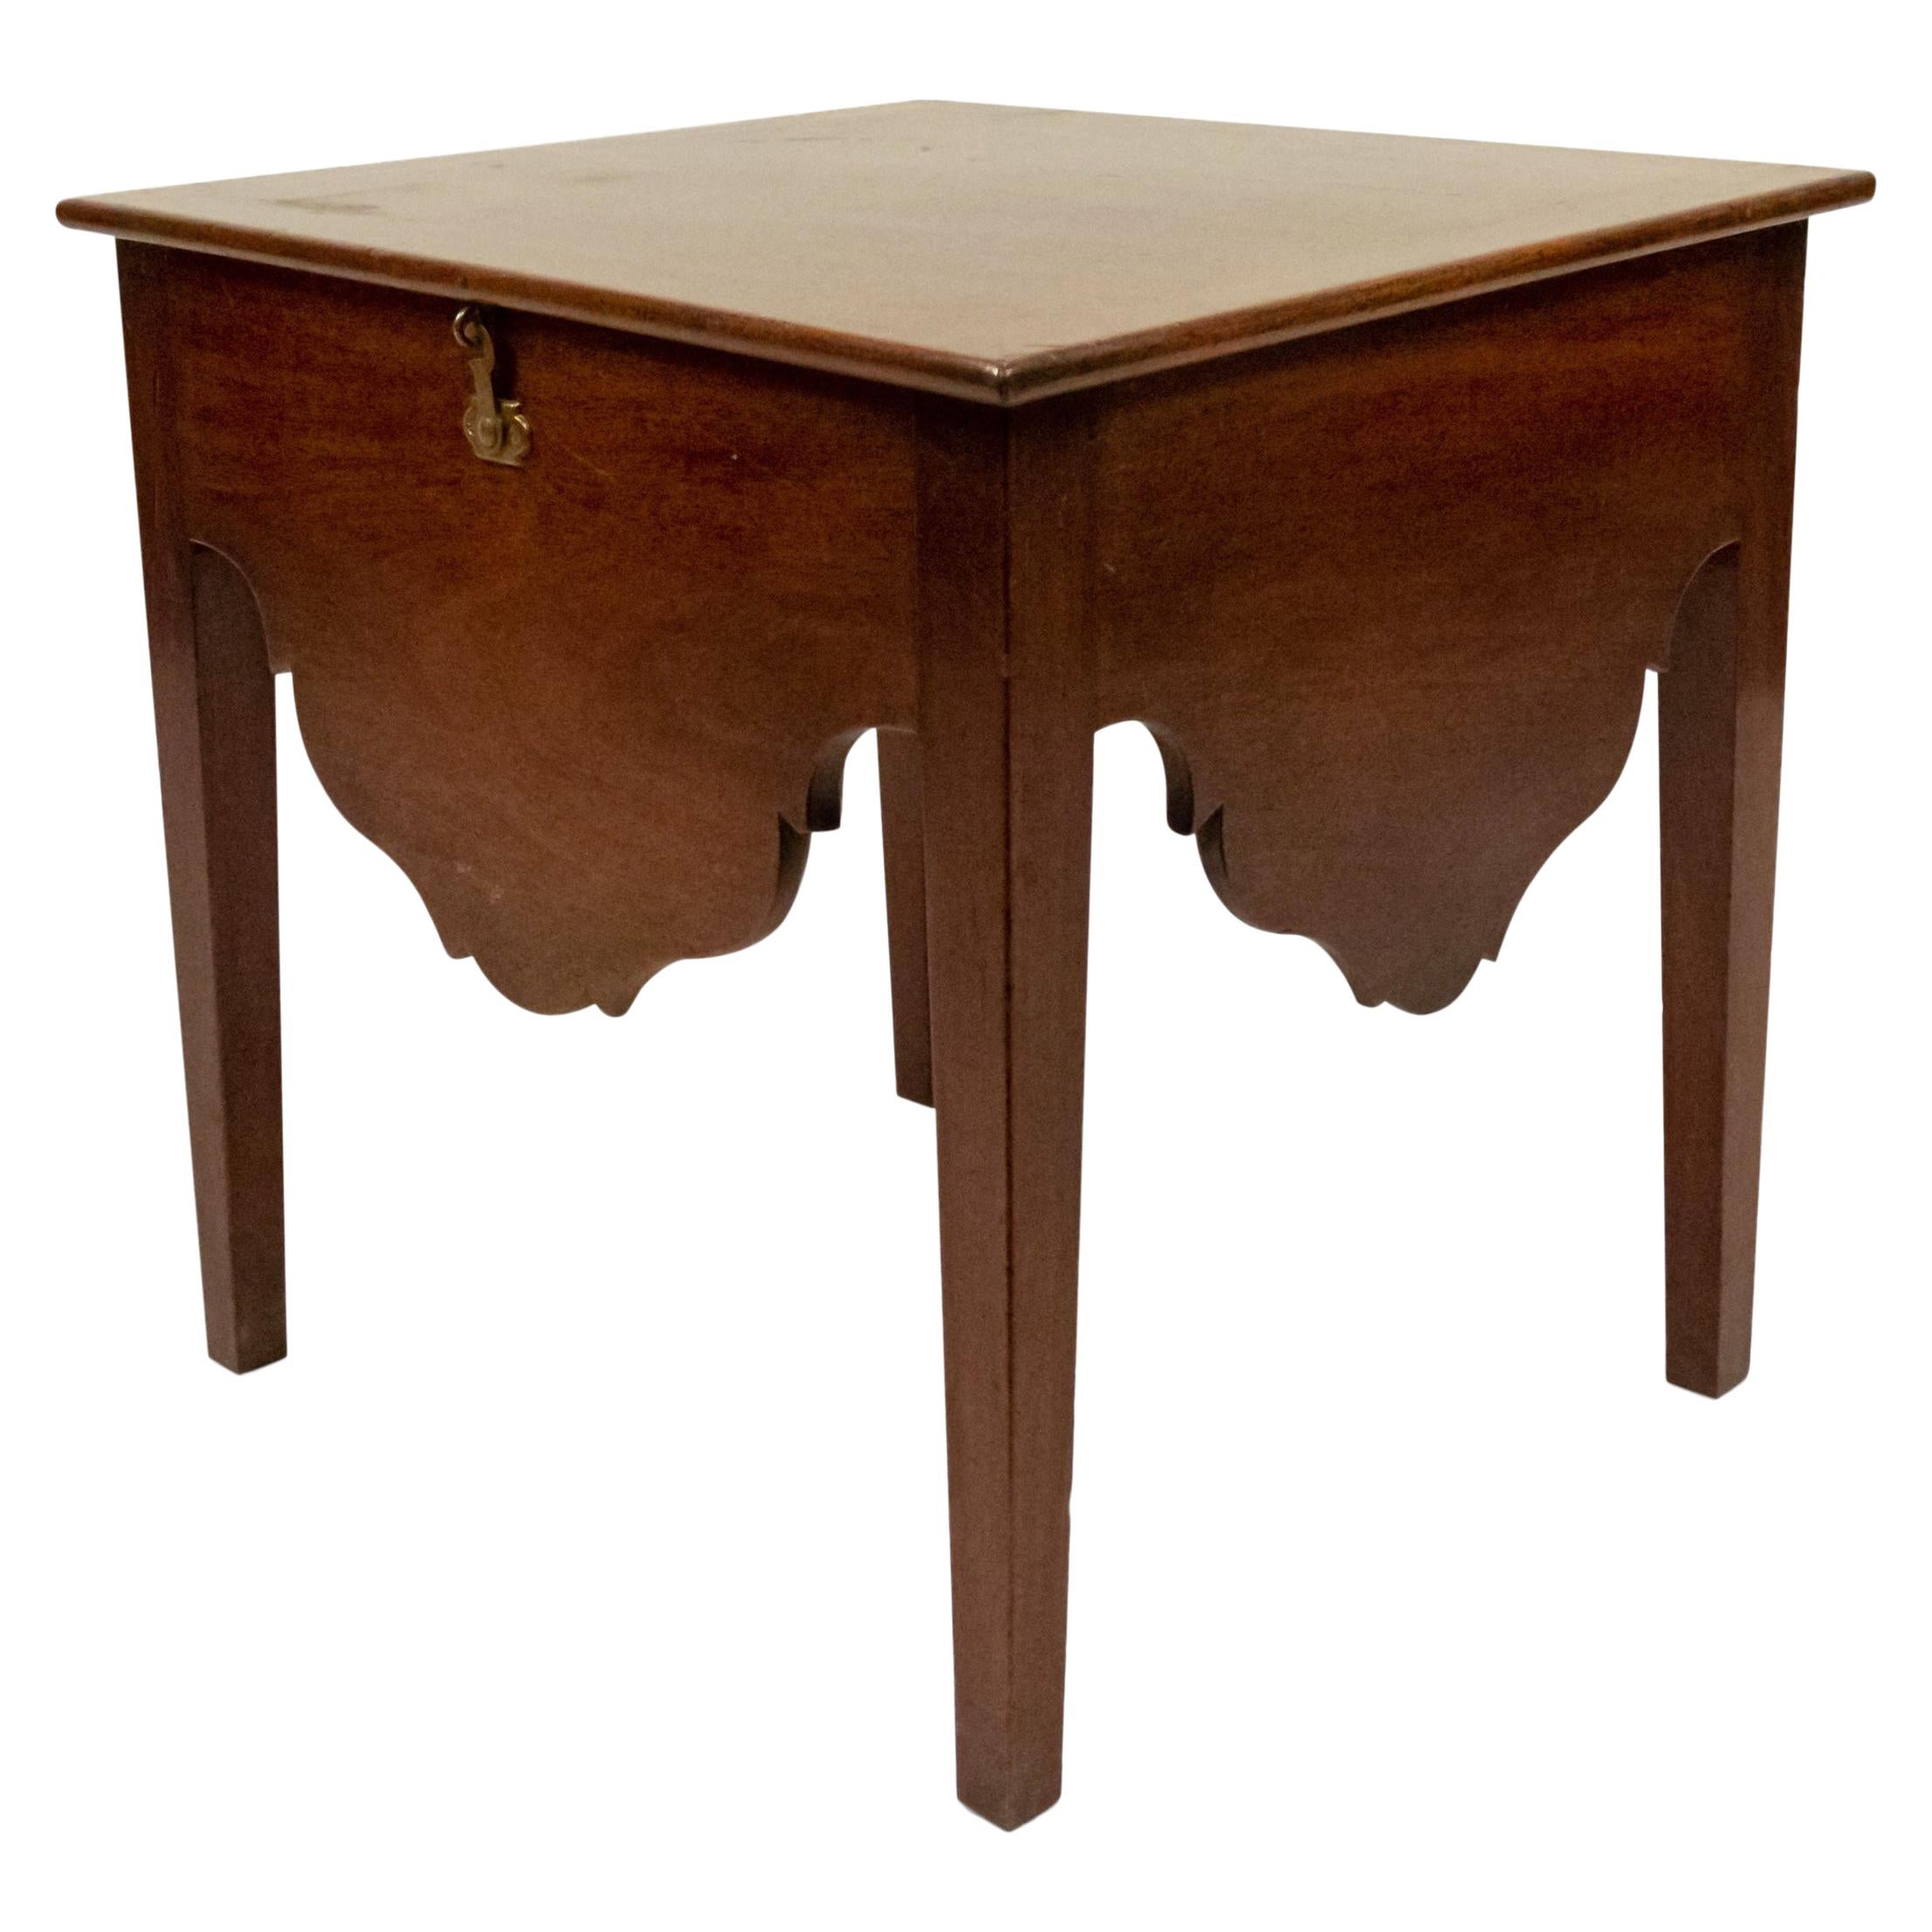 Georgian Mahogany Low End Table with Lift Top